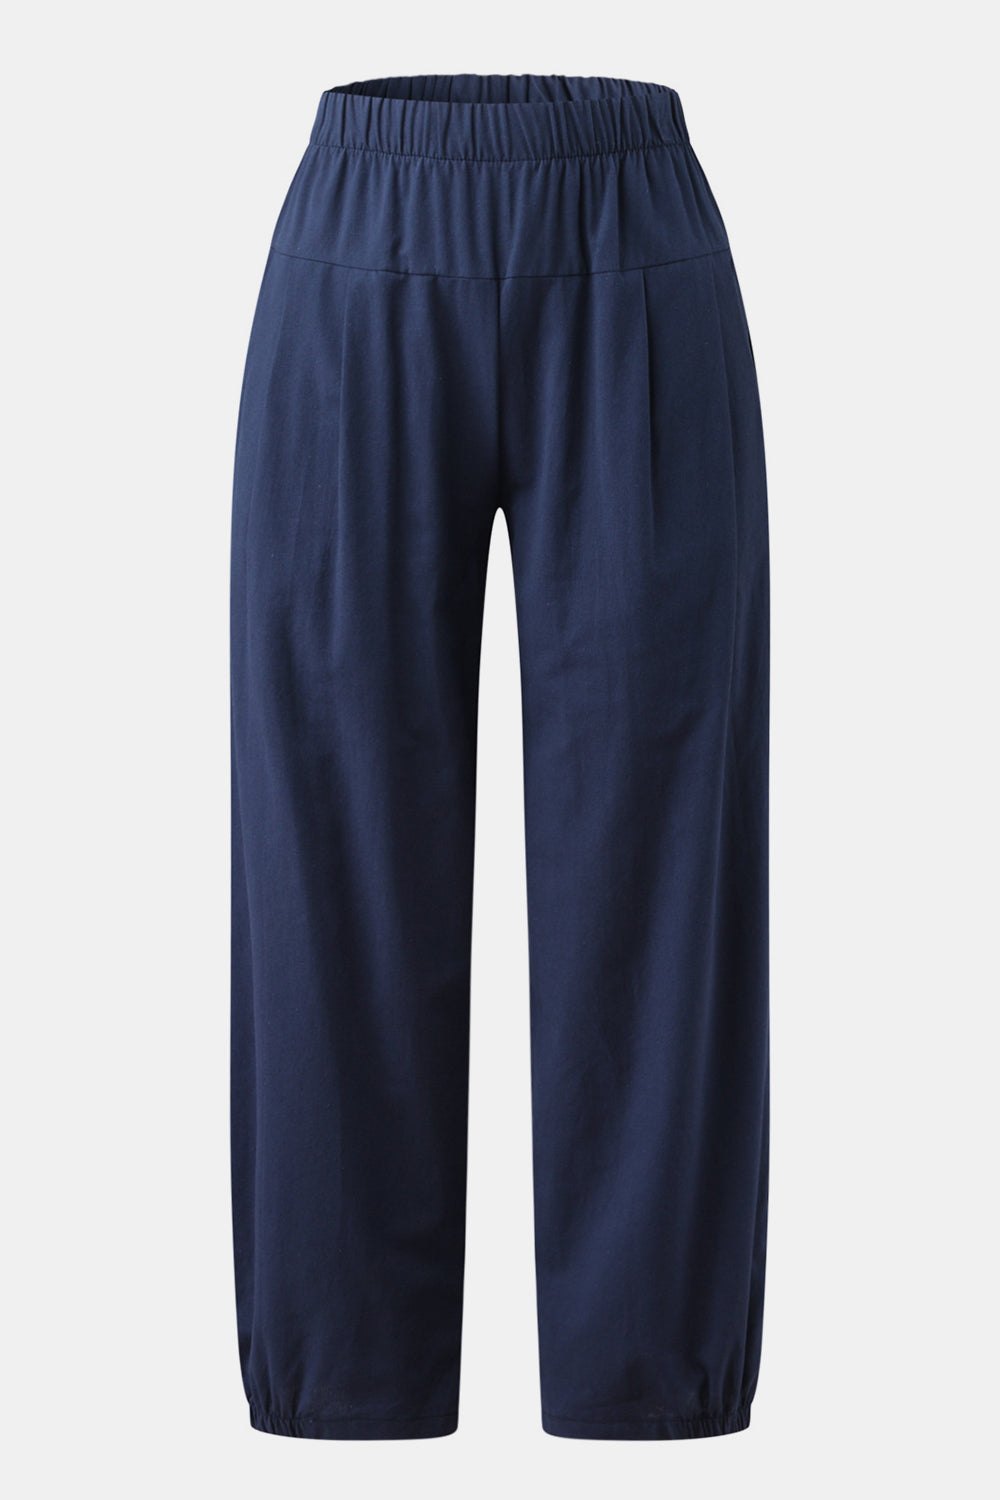 STUNNLY  Full Size Elastic Waist Cropped Pants   